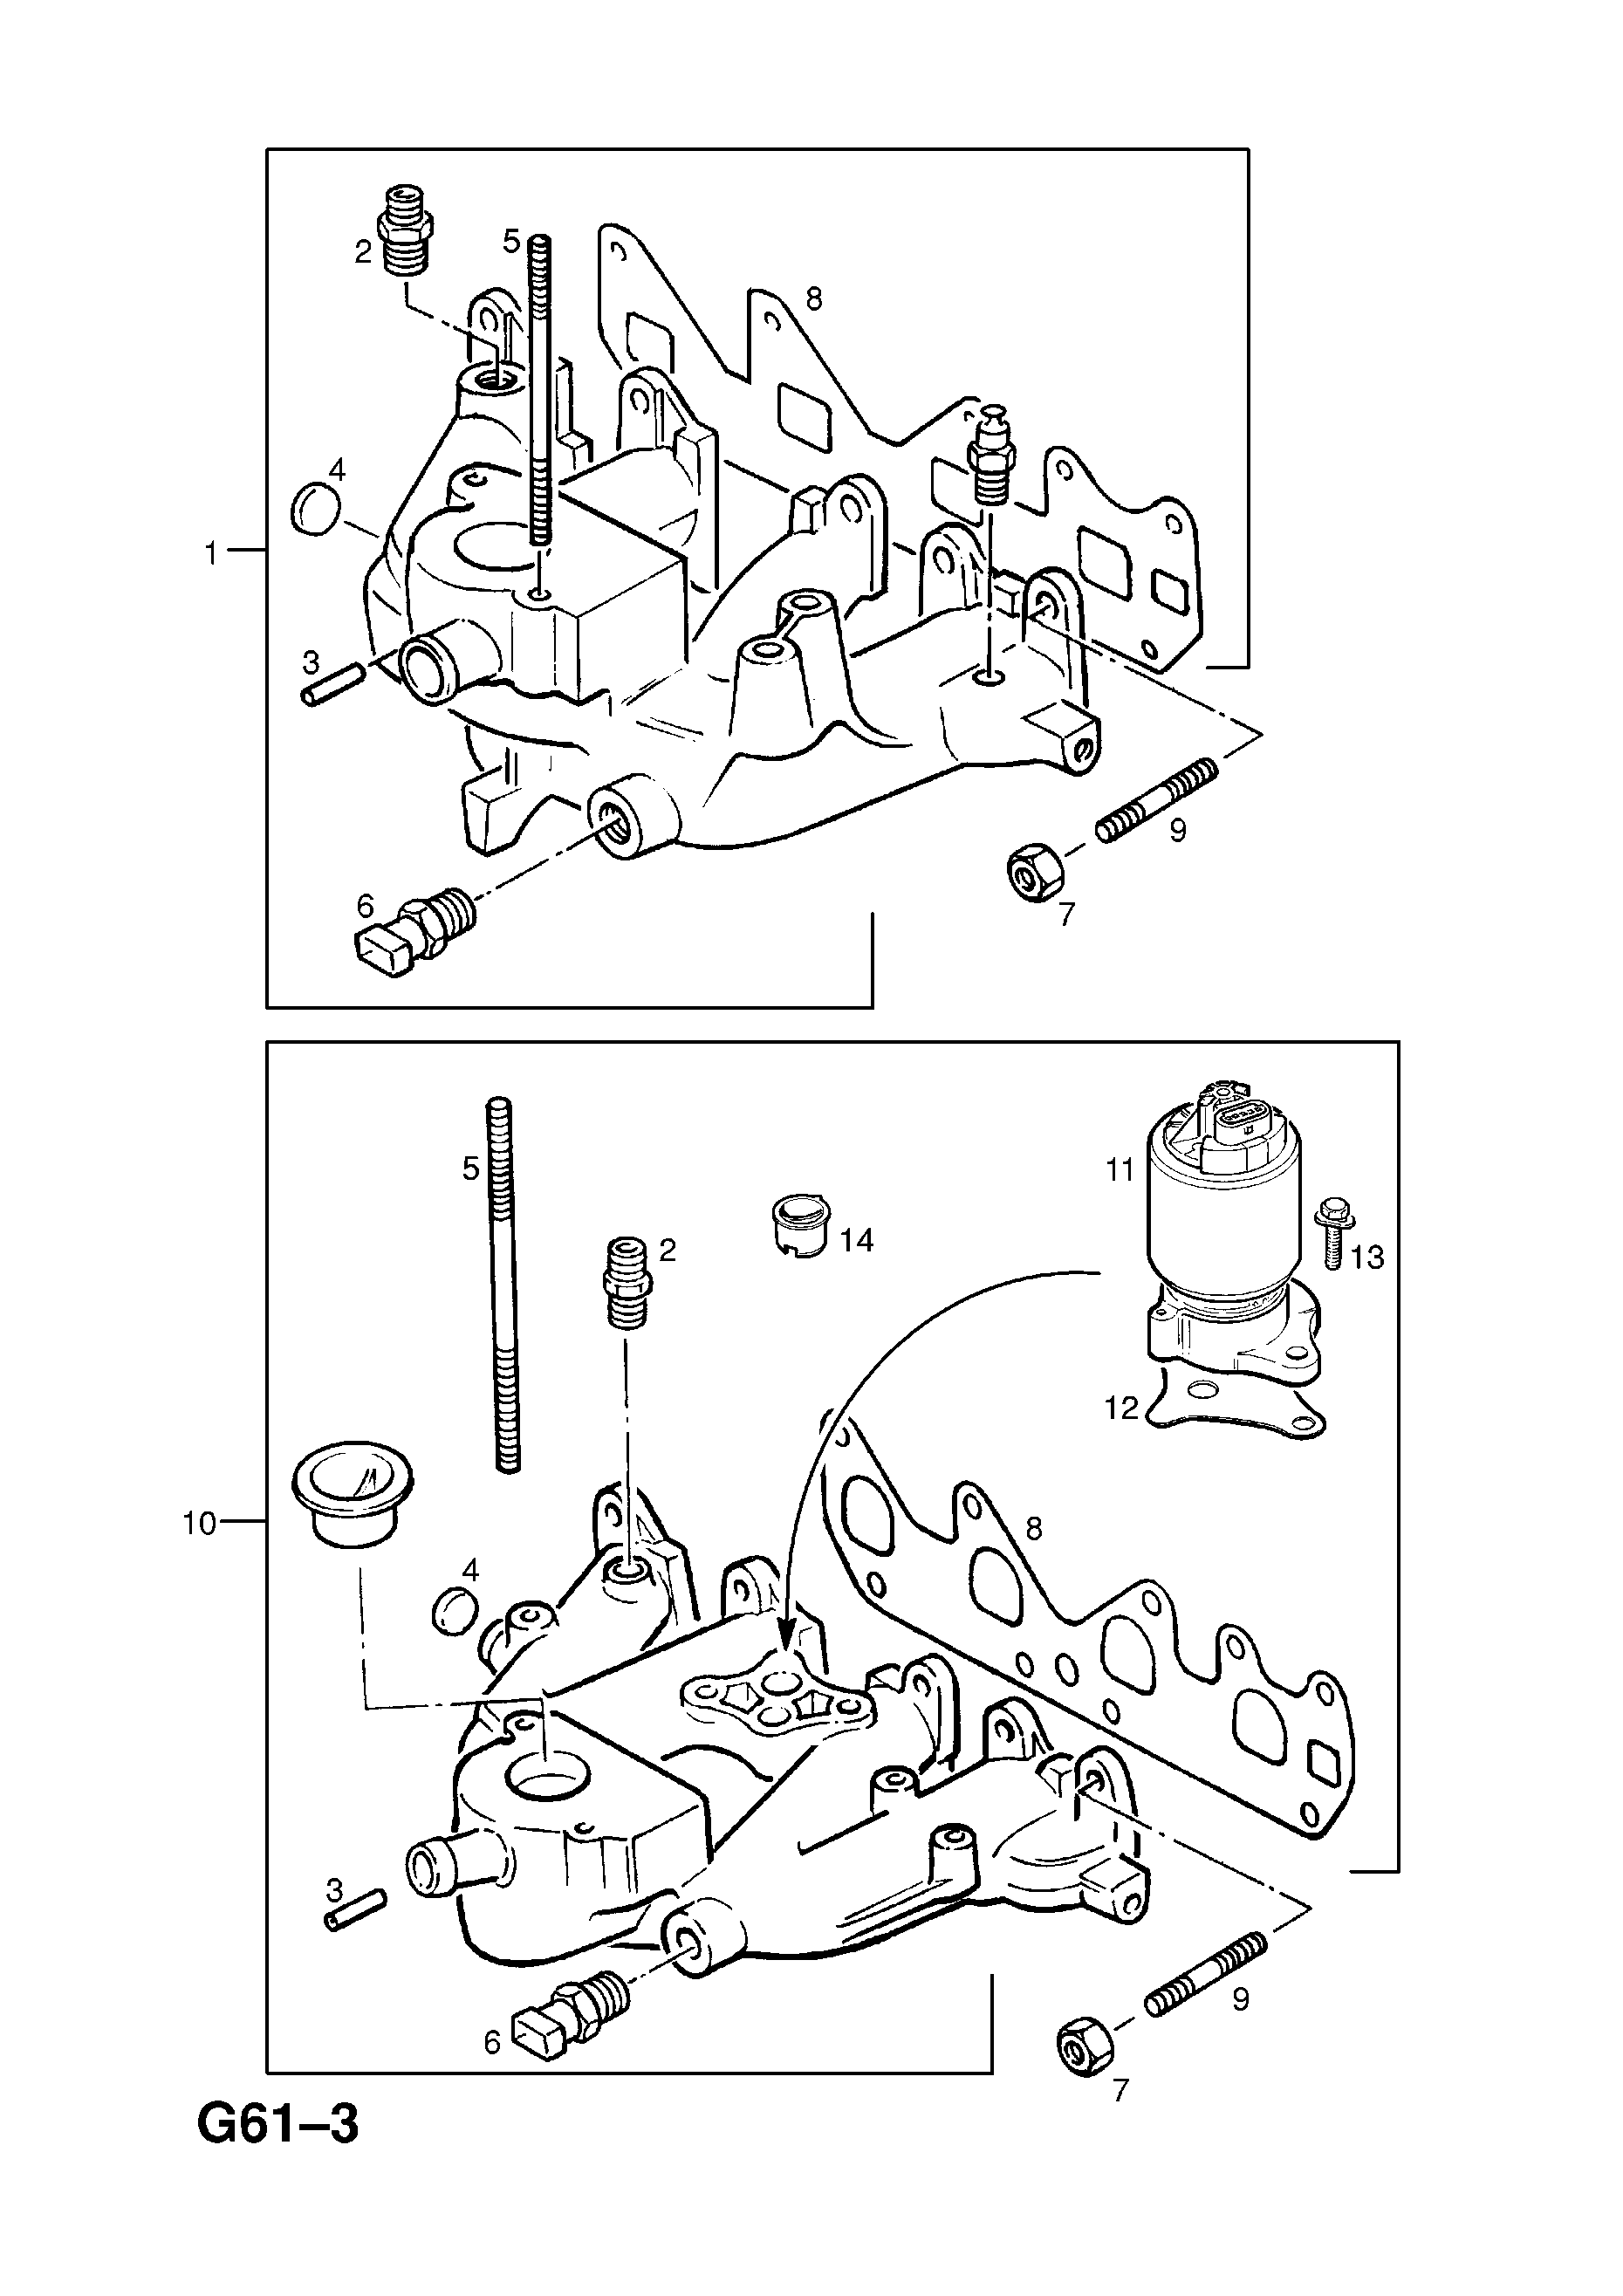 INDUCTION MANIFOLD (CONTD.) <small><i>[C14NZ[2H6] ENGINE]</i></small>